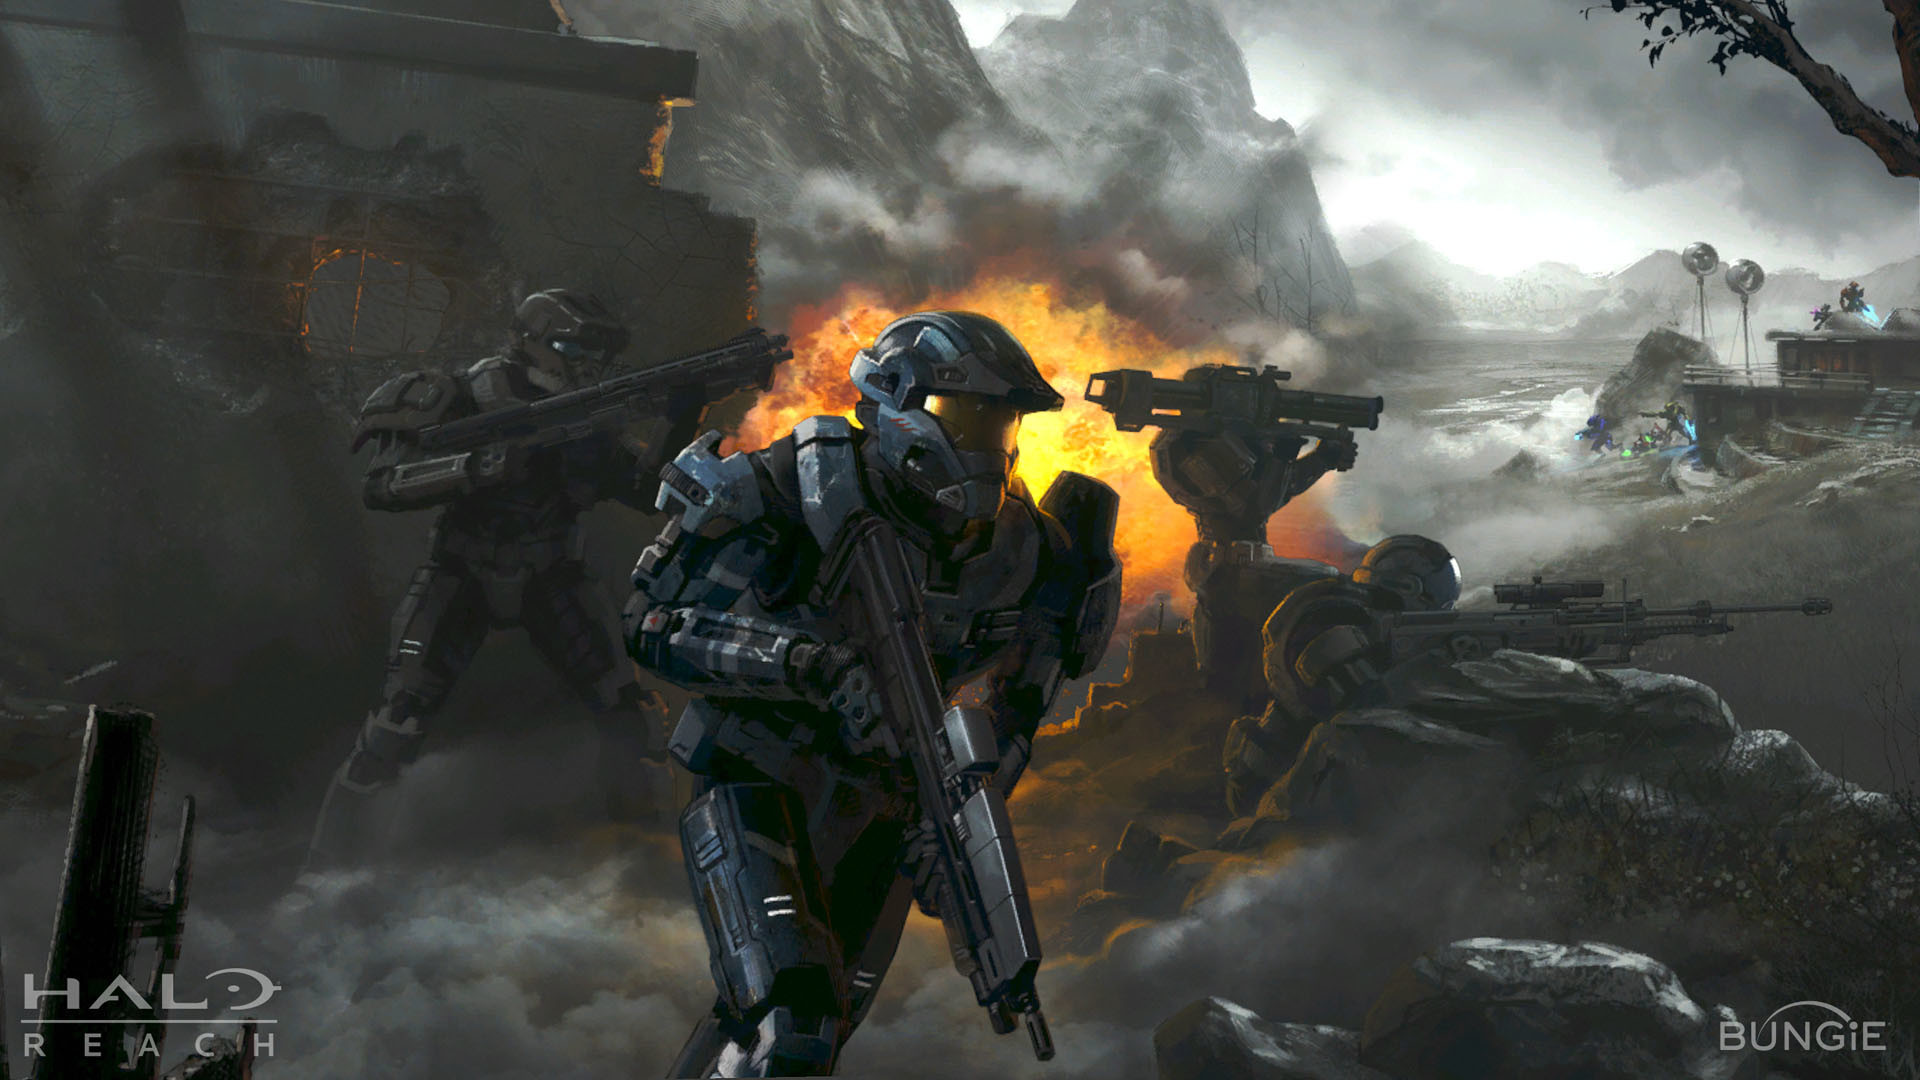 1920x1080 Epic Halo Reach Wallpapers ( Px, 0.24 Mb)